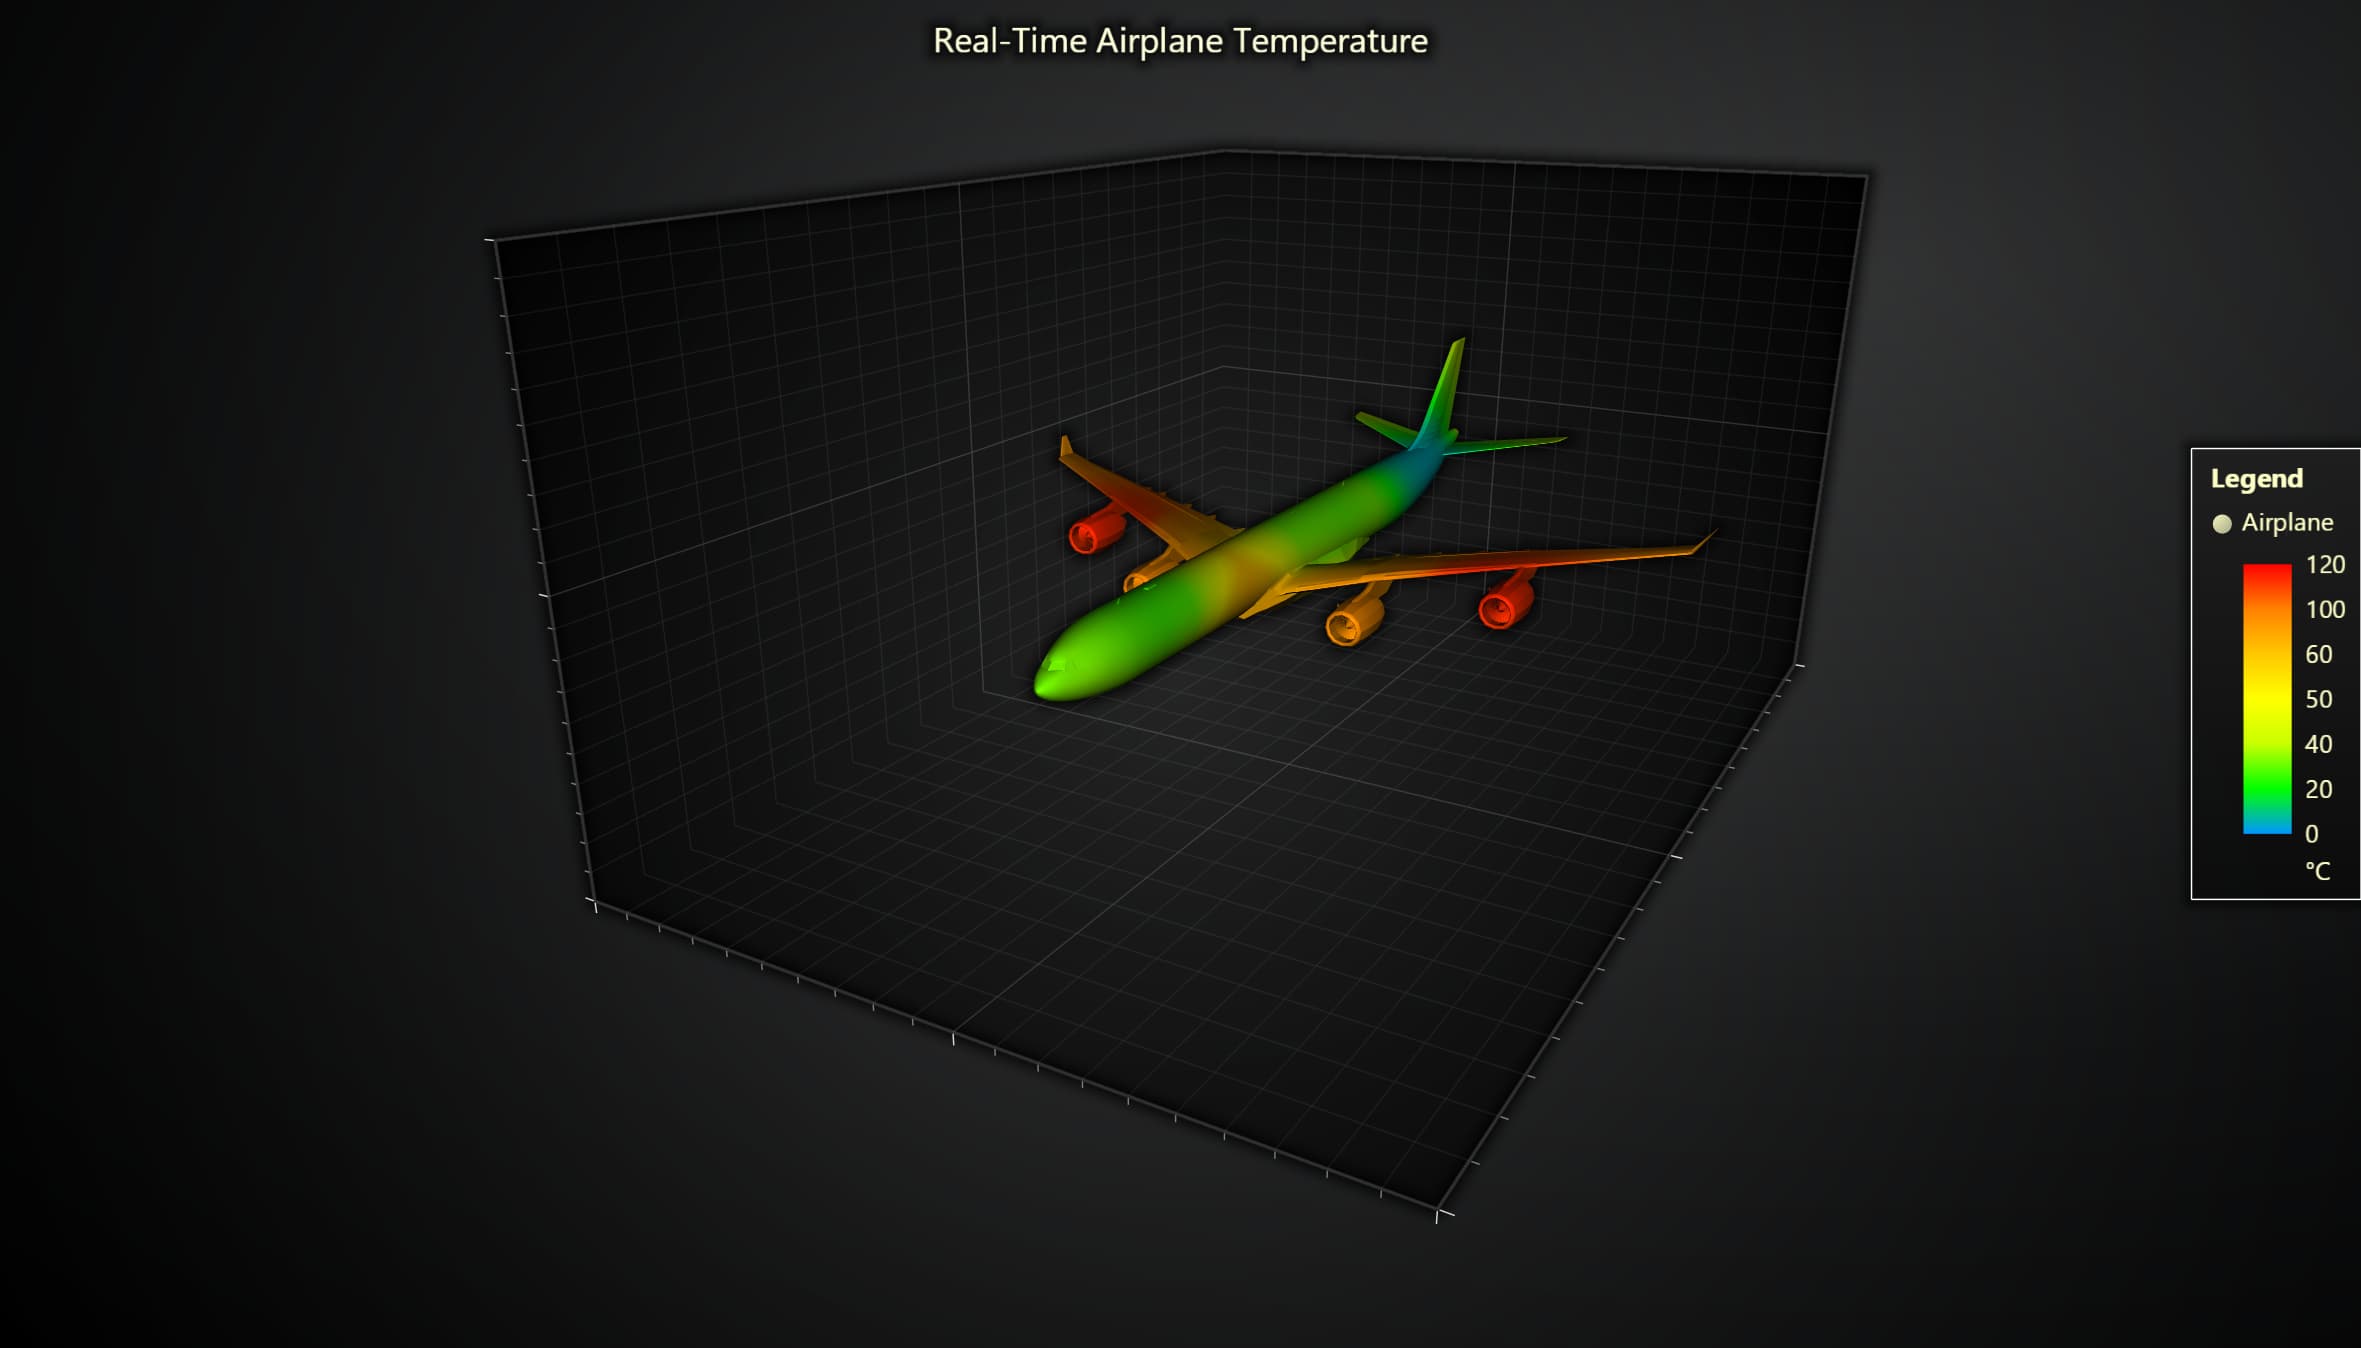 Real-Time Airplane Temperature